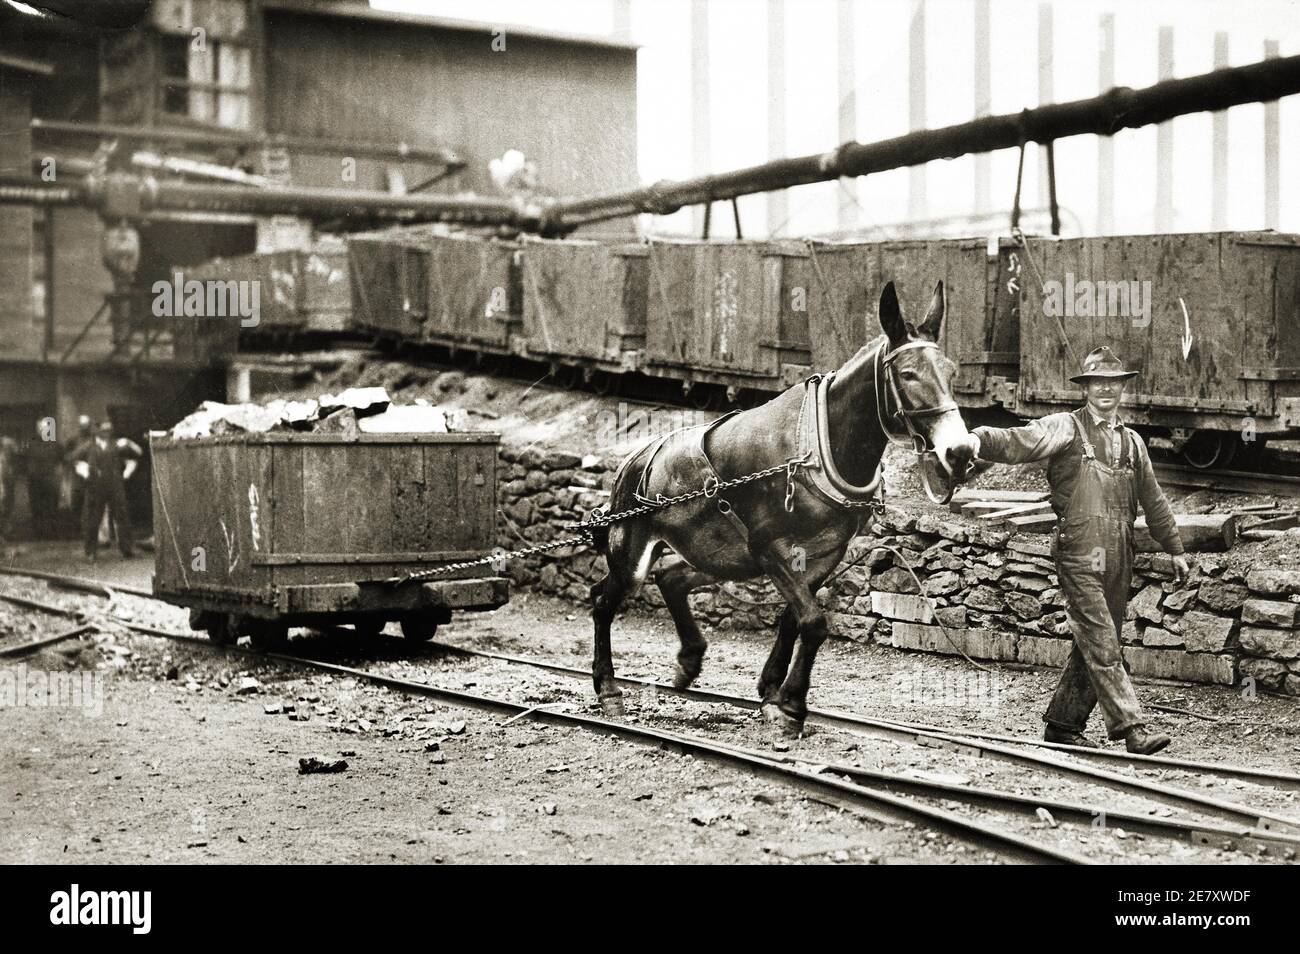 A mule pulling a load of anthracite coal from the Swoyer Mine on Kossack St. Swoyersville Pennsylvania. USA Mid 1900s...Mules were considered more valuable than men at that time. Stock Photo